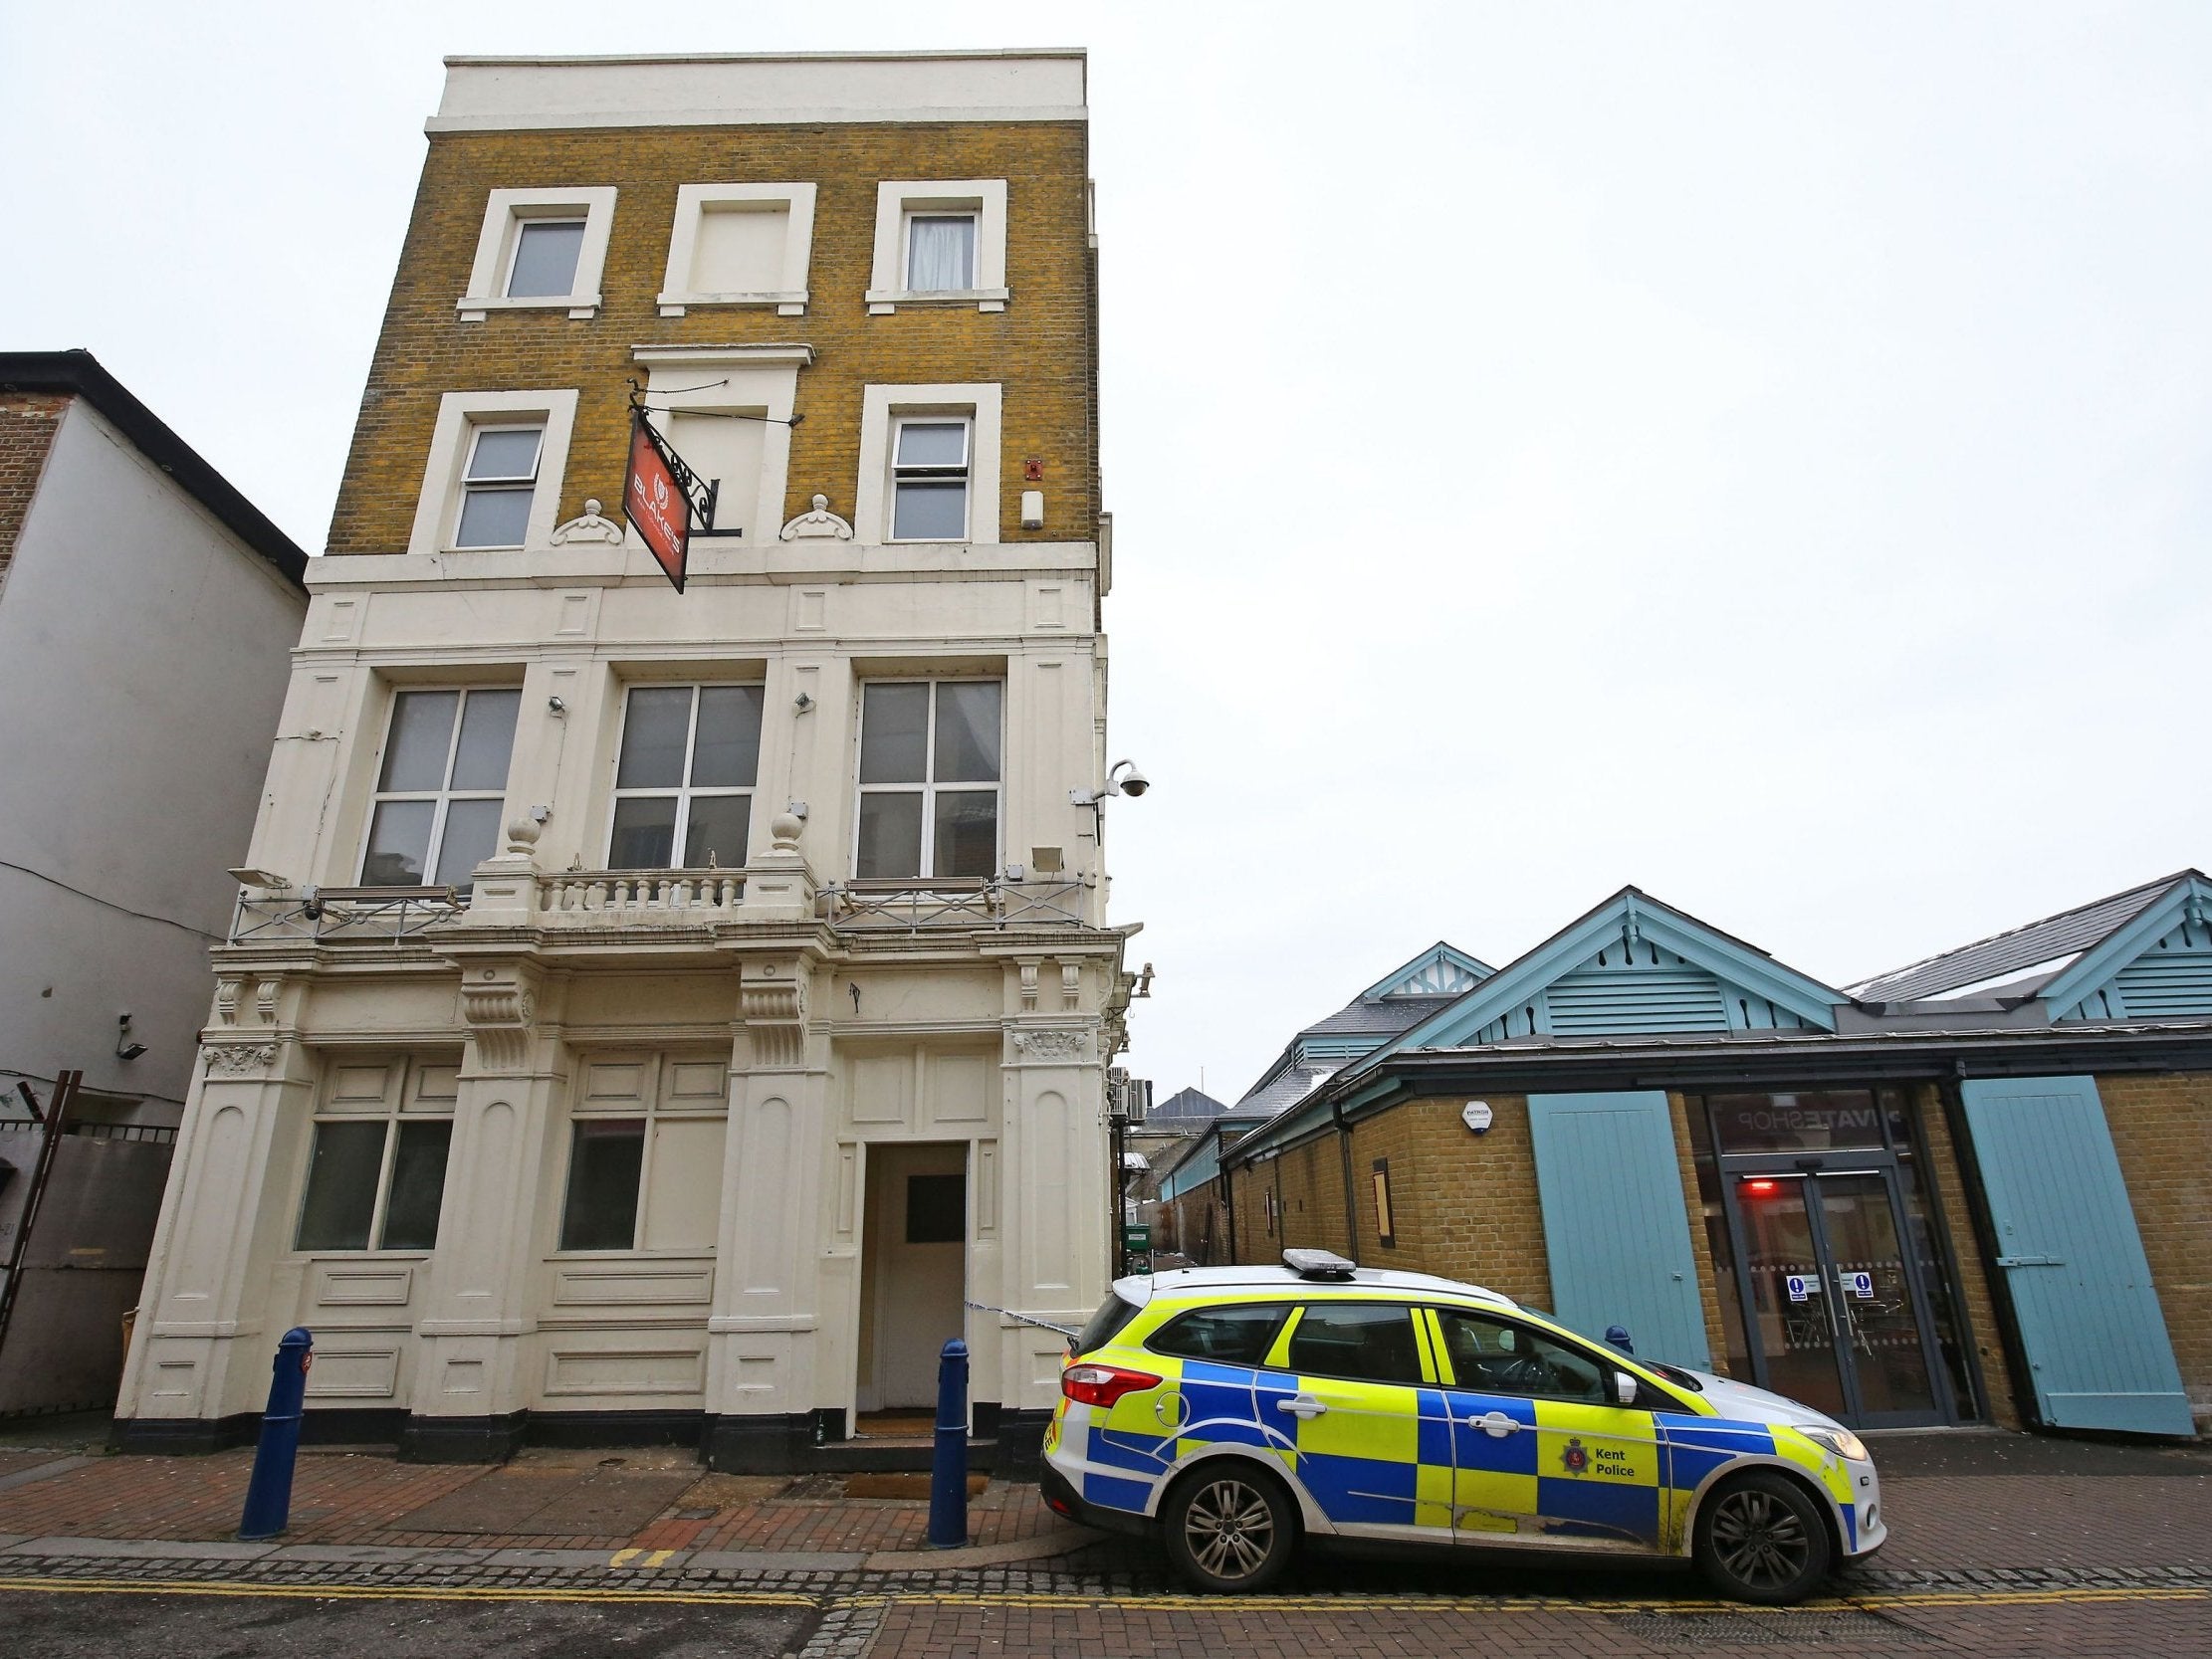 Blake's nightclub in Gravesend, the day after the incident